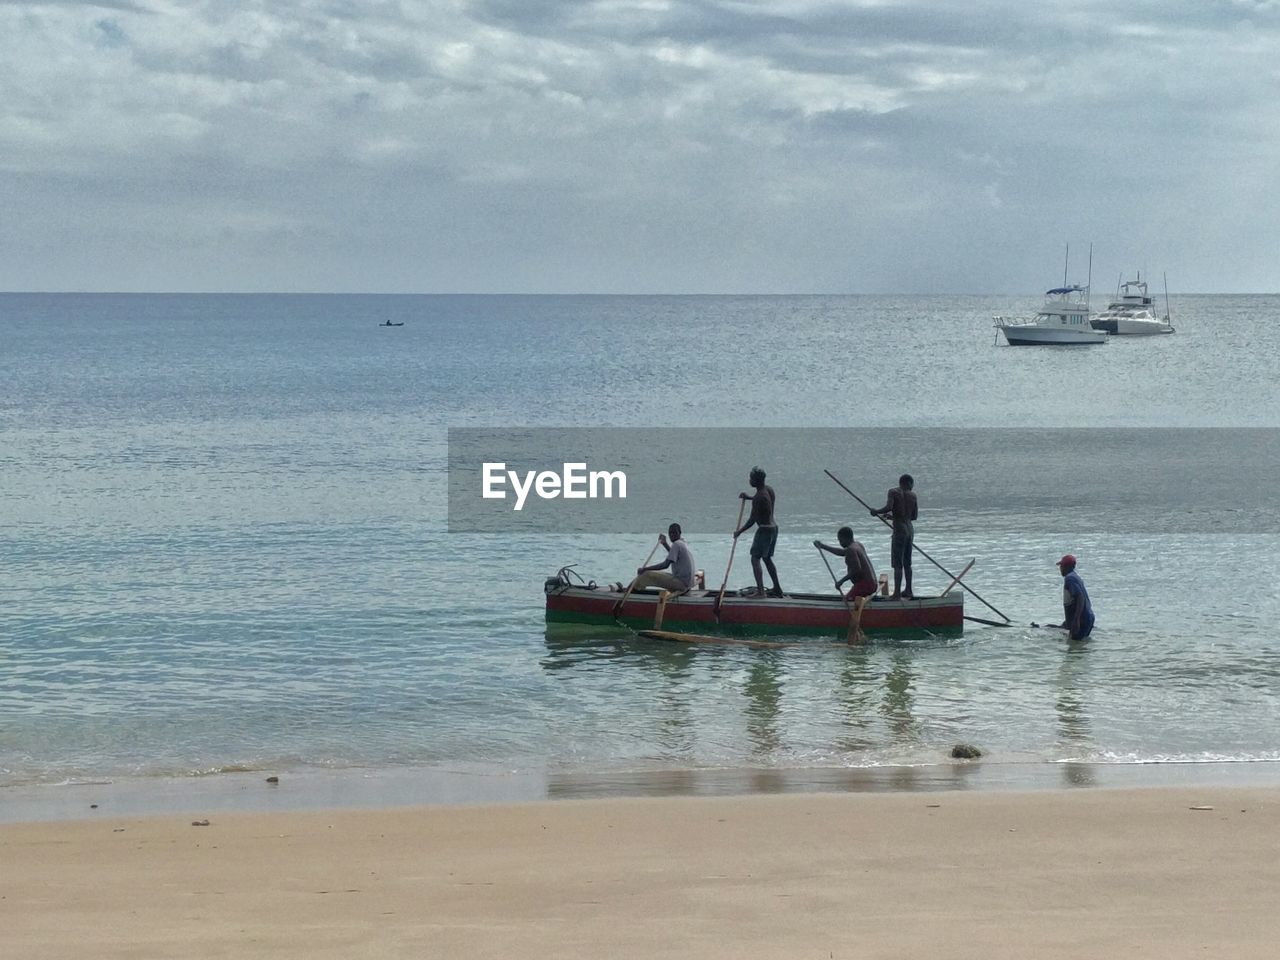 People boating in sea